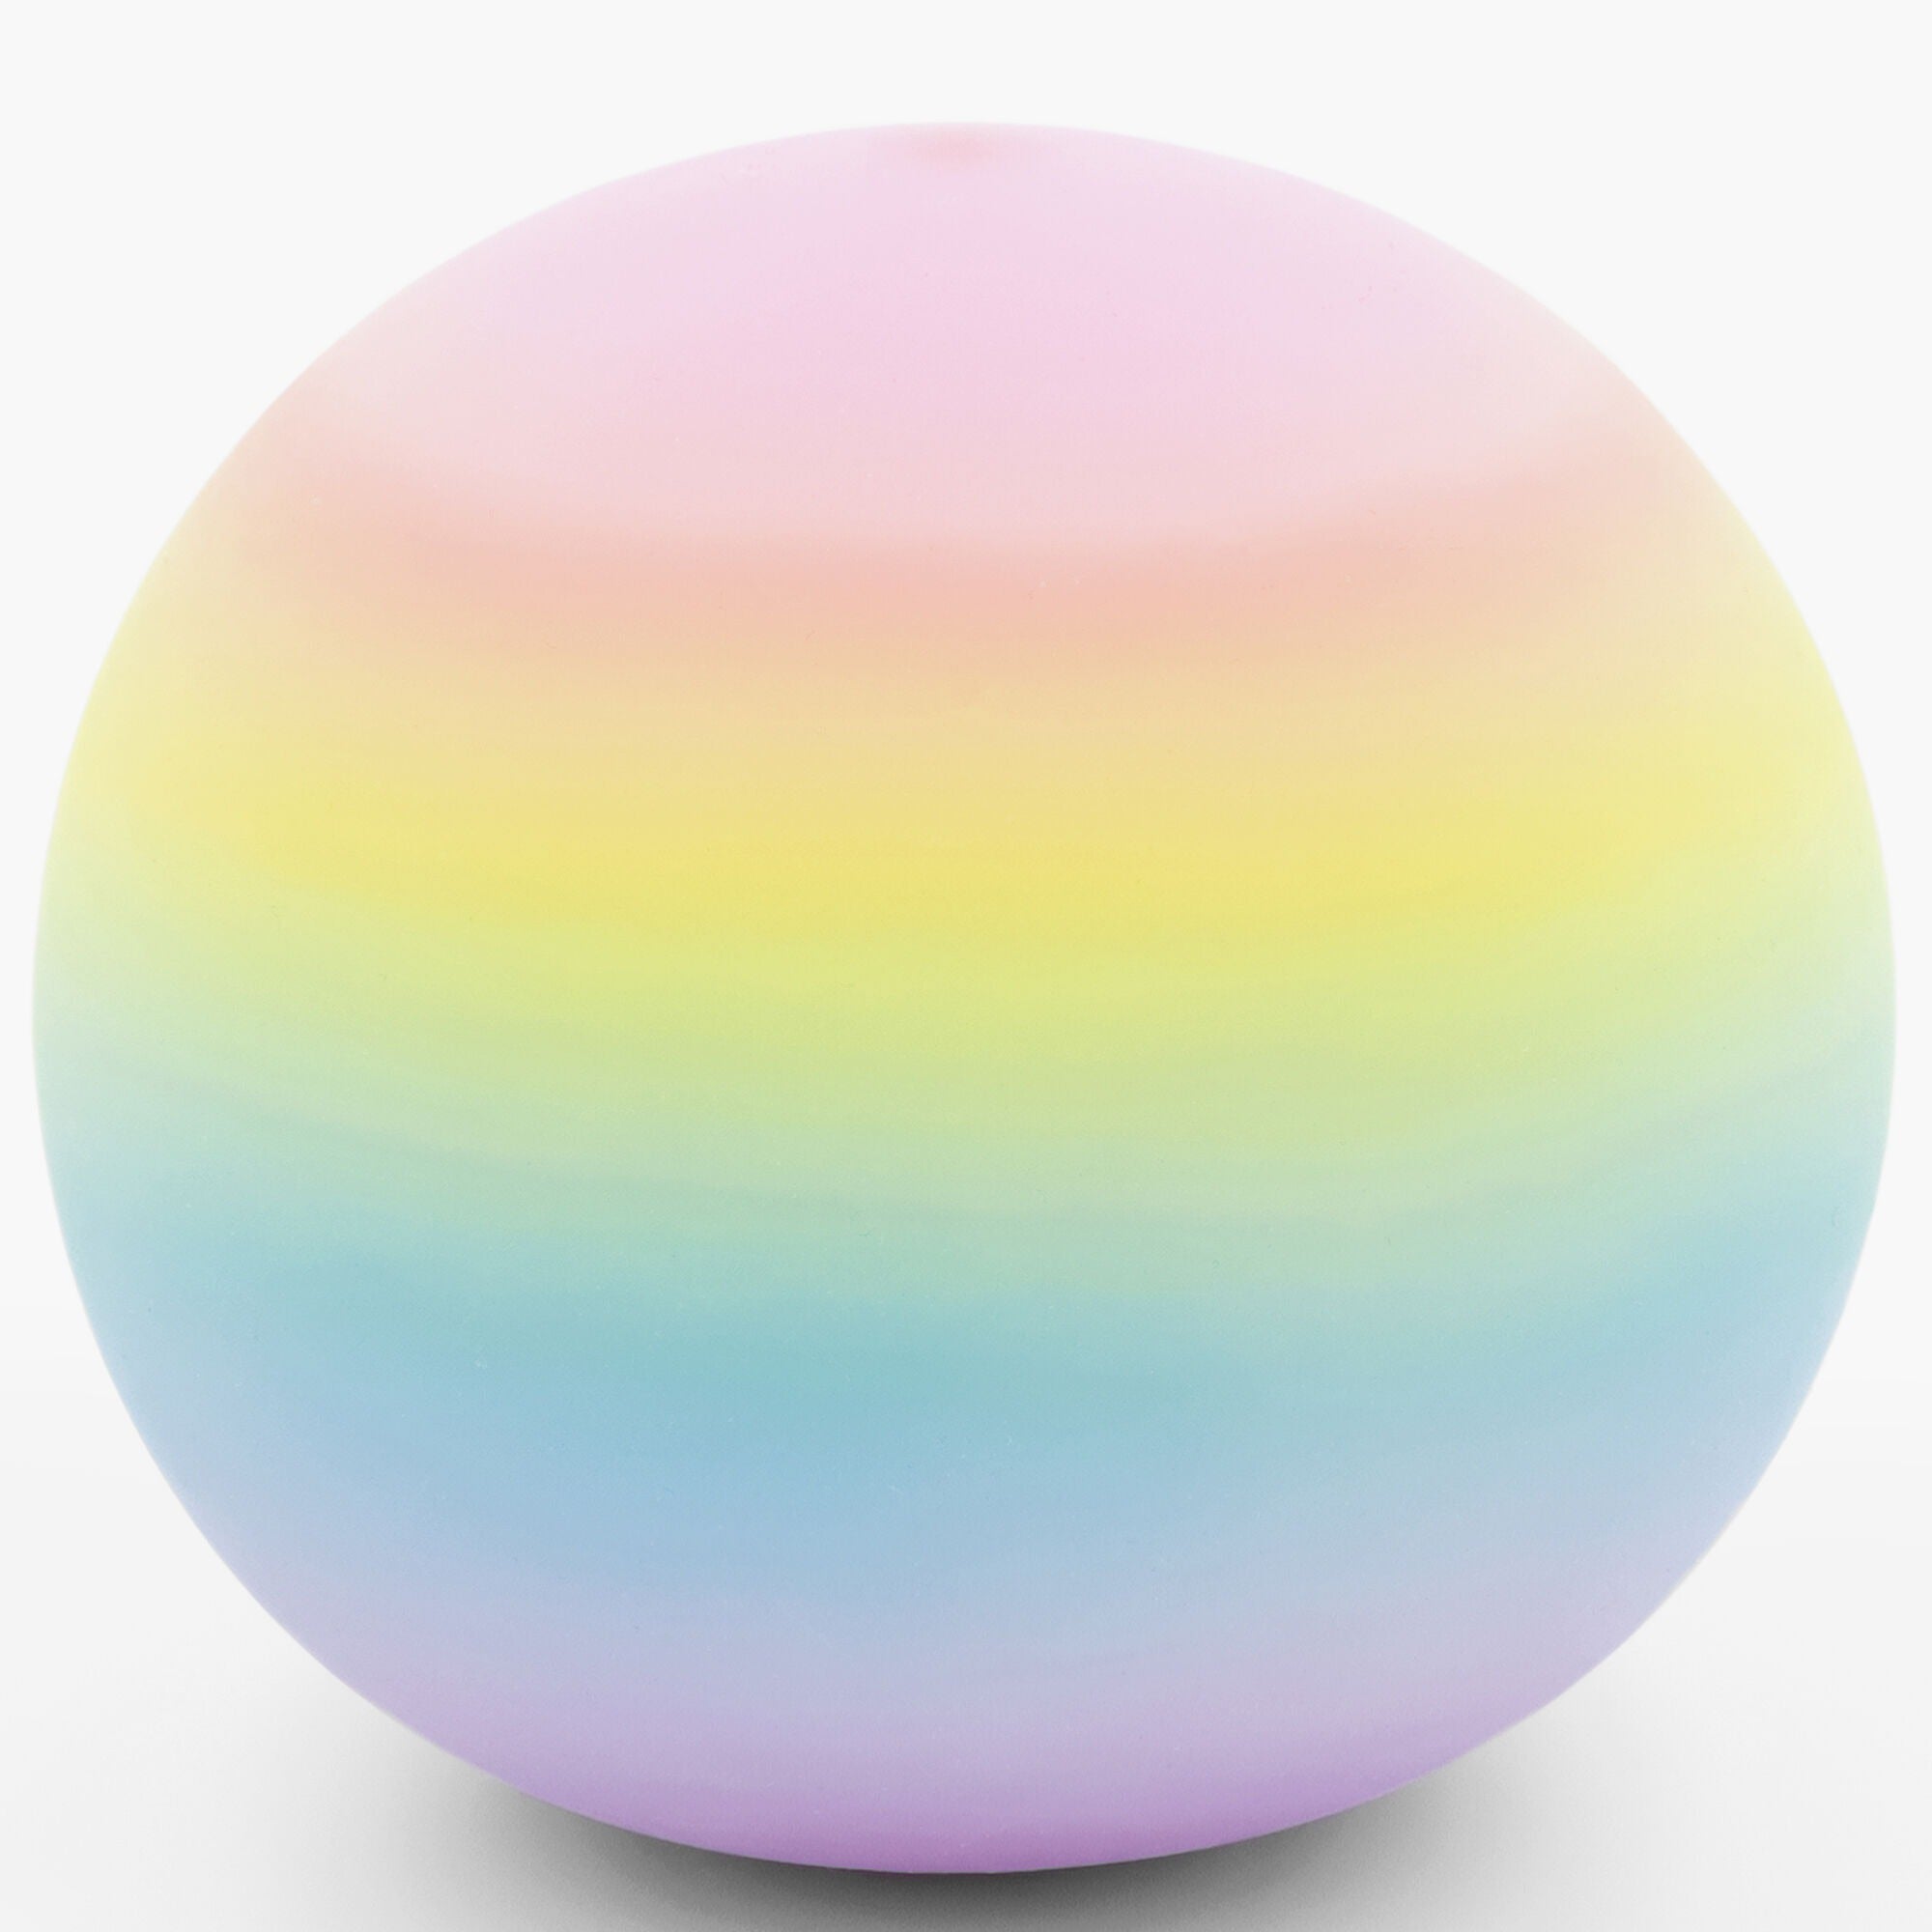 Pastel Rainbow Squish Ball Fidget Toy, Need to take a breather and relax? Look no further than the Sparkly Squish Ball, the ultimate Groovy Glob that will mesmerize your eyes and calm your spirit. With its vibrant colors and soothing texture, this fidget toy is designed to help you unwind and find your inner peace.Squeeze the Sparkly Squish Ball and let it transport you to a whole new realm of vivid colors and tranquility. As you press down on this magical stress ball, watch as the pastel rainbow hues dance